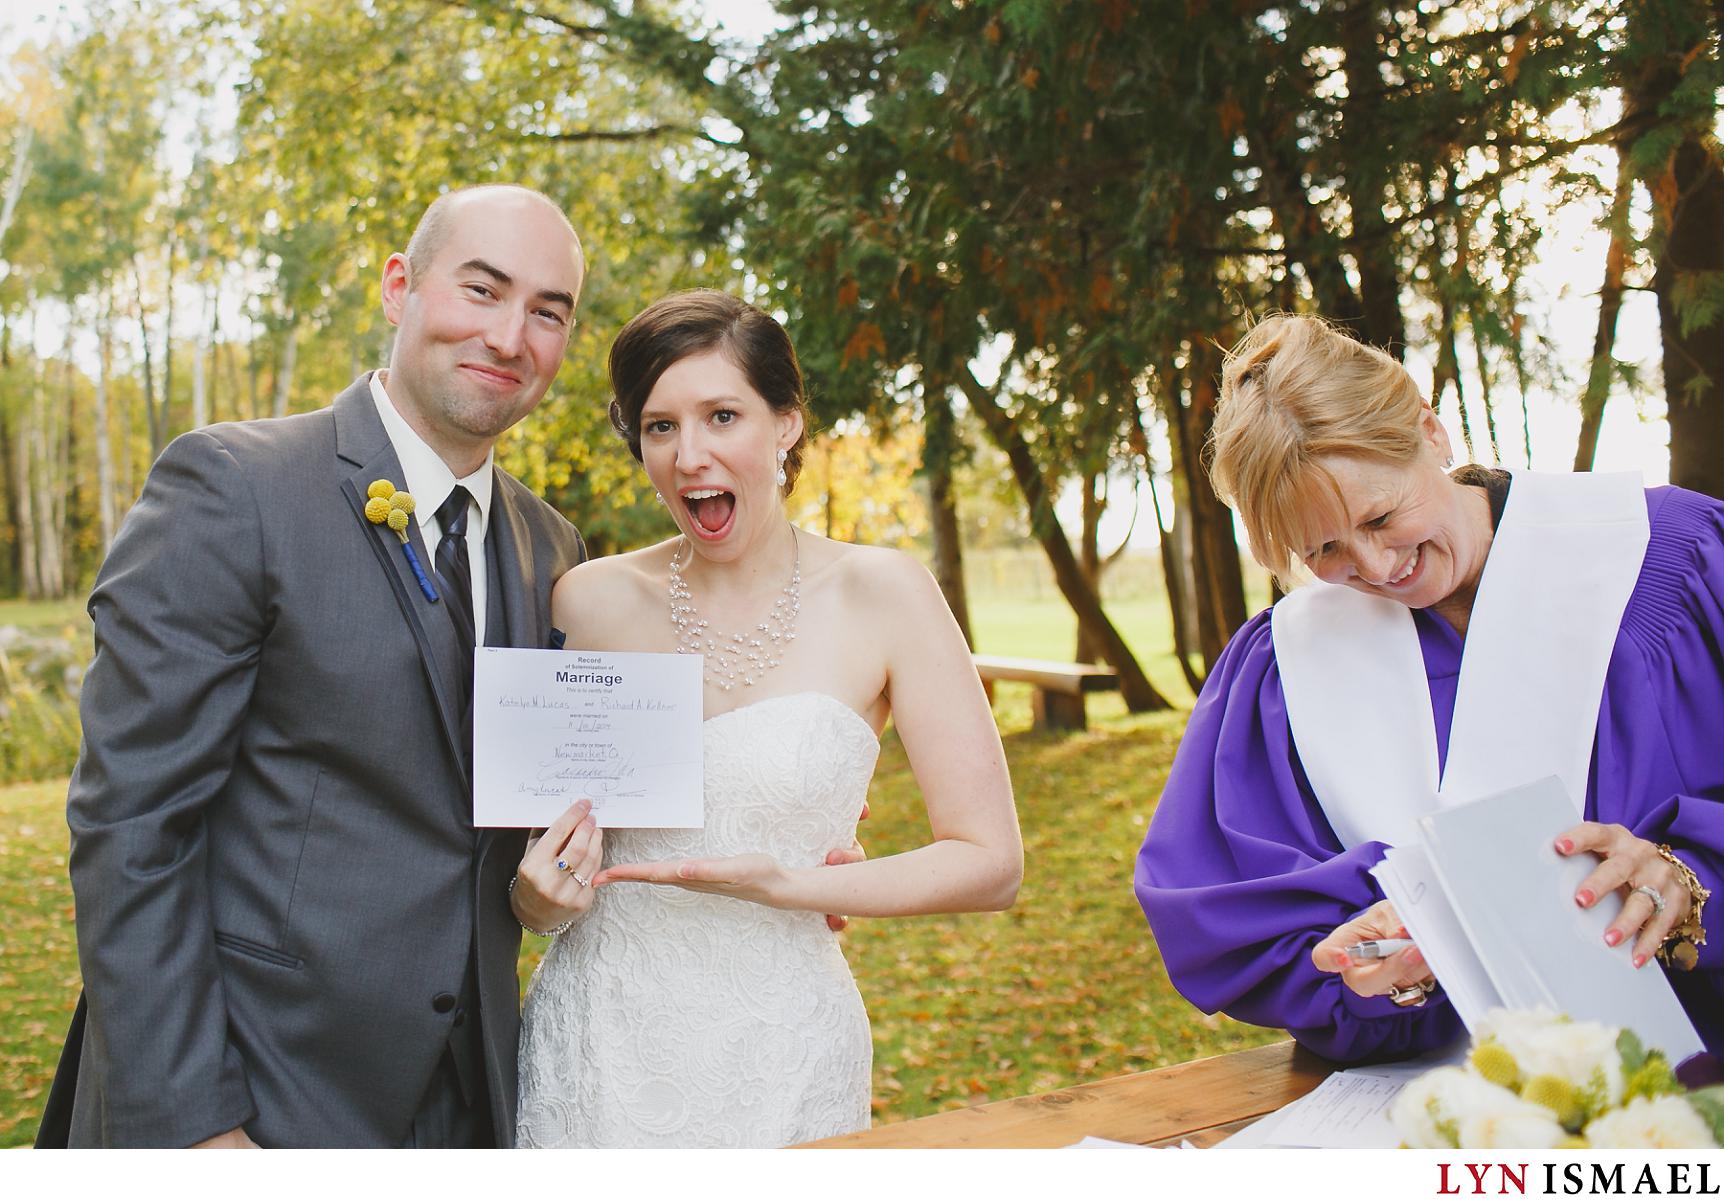 Bride displays their marriage certificate to their Holland Marsh wedding photographer.